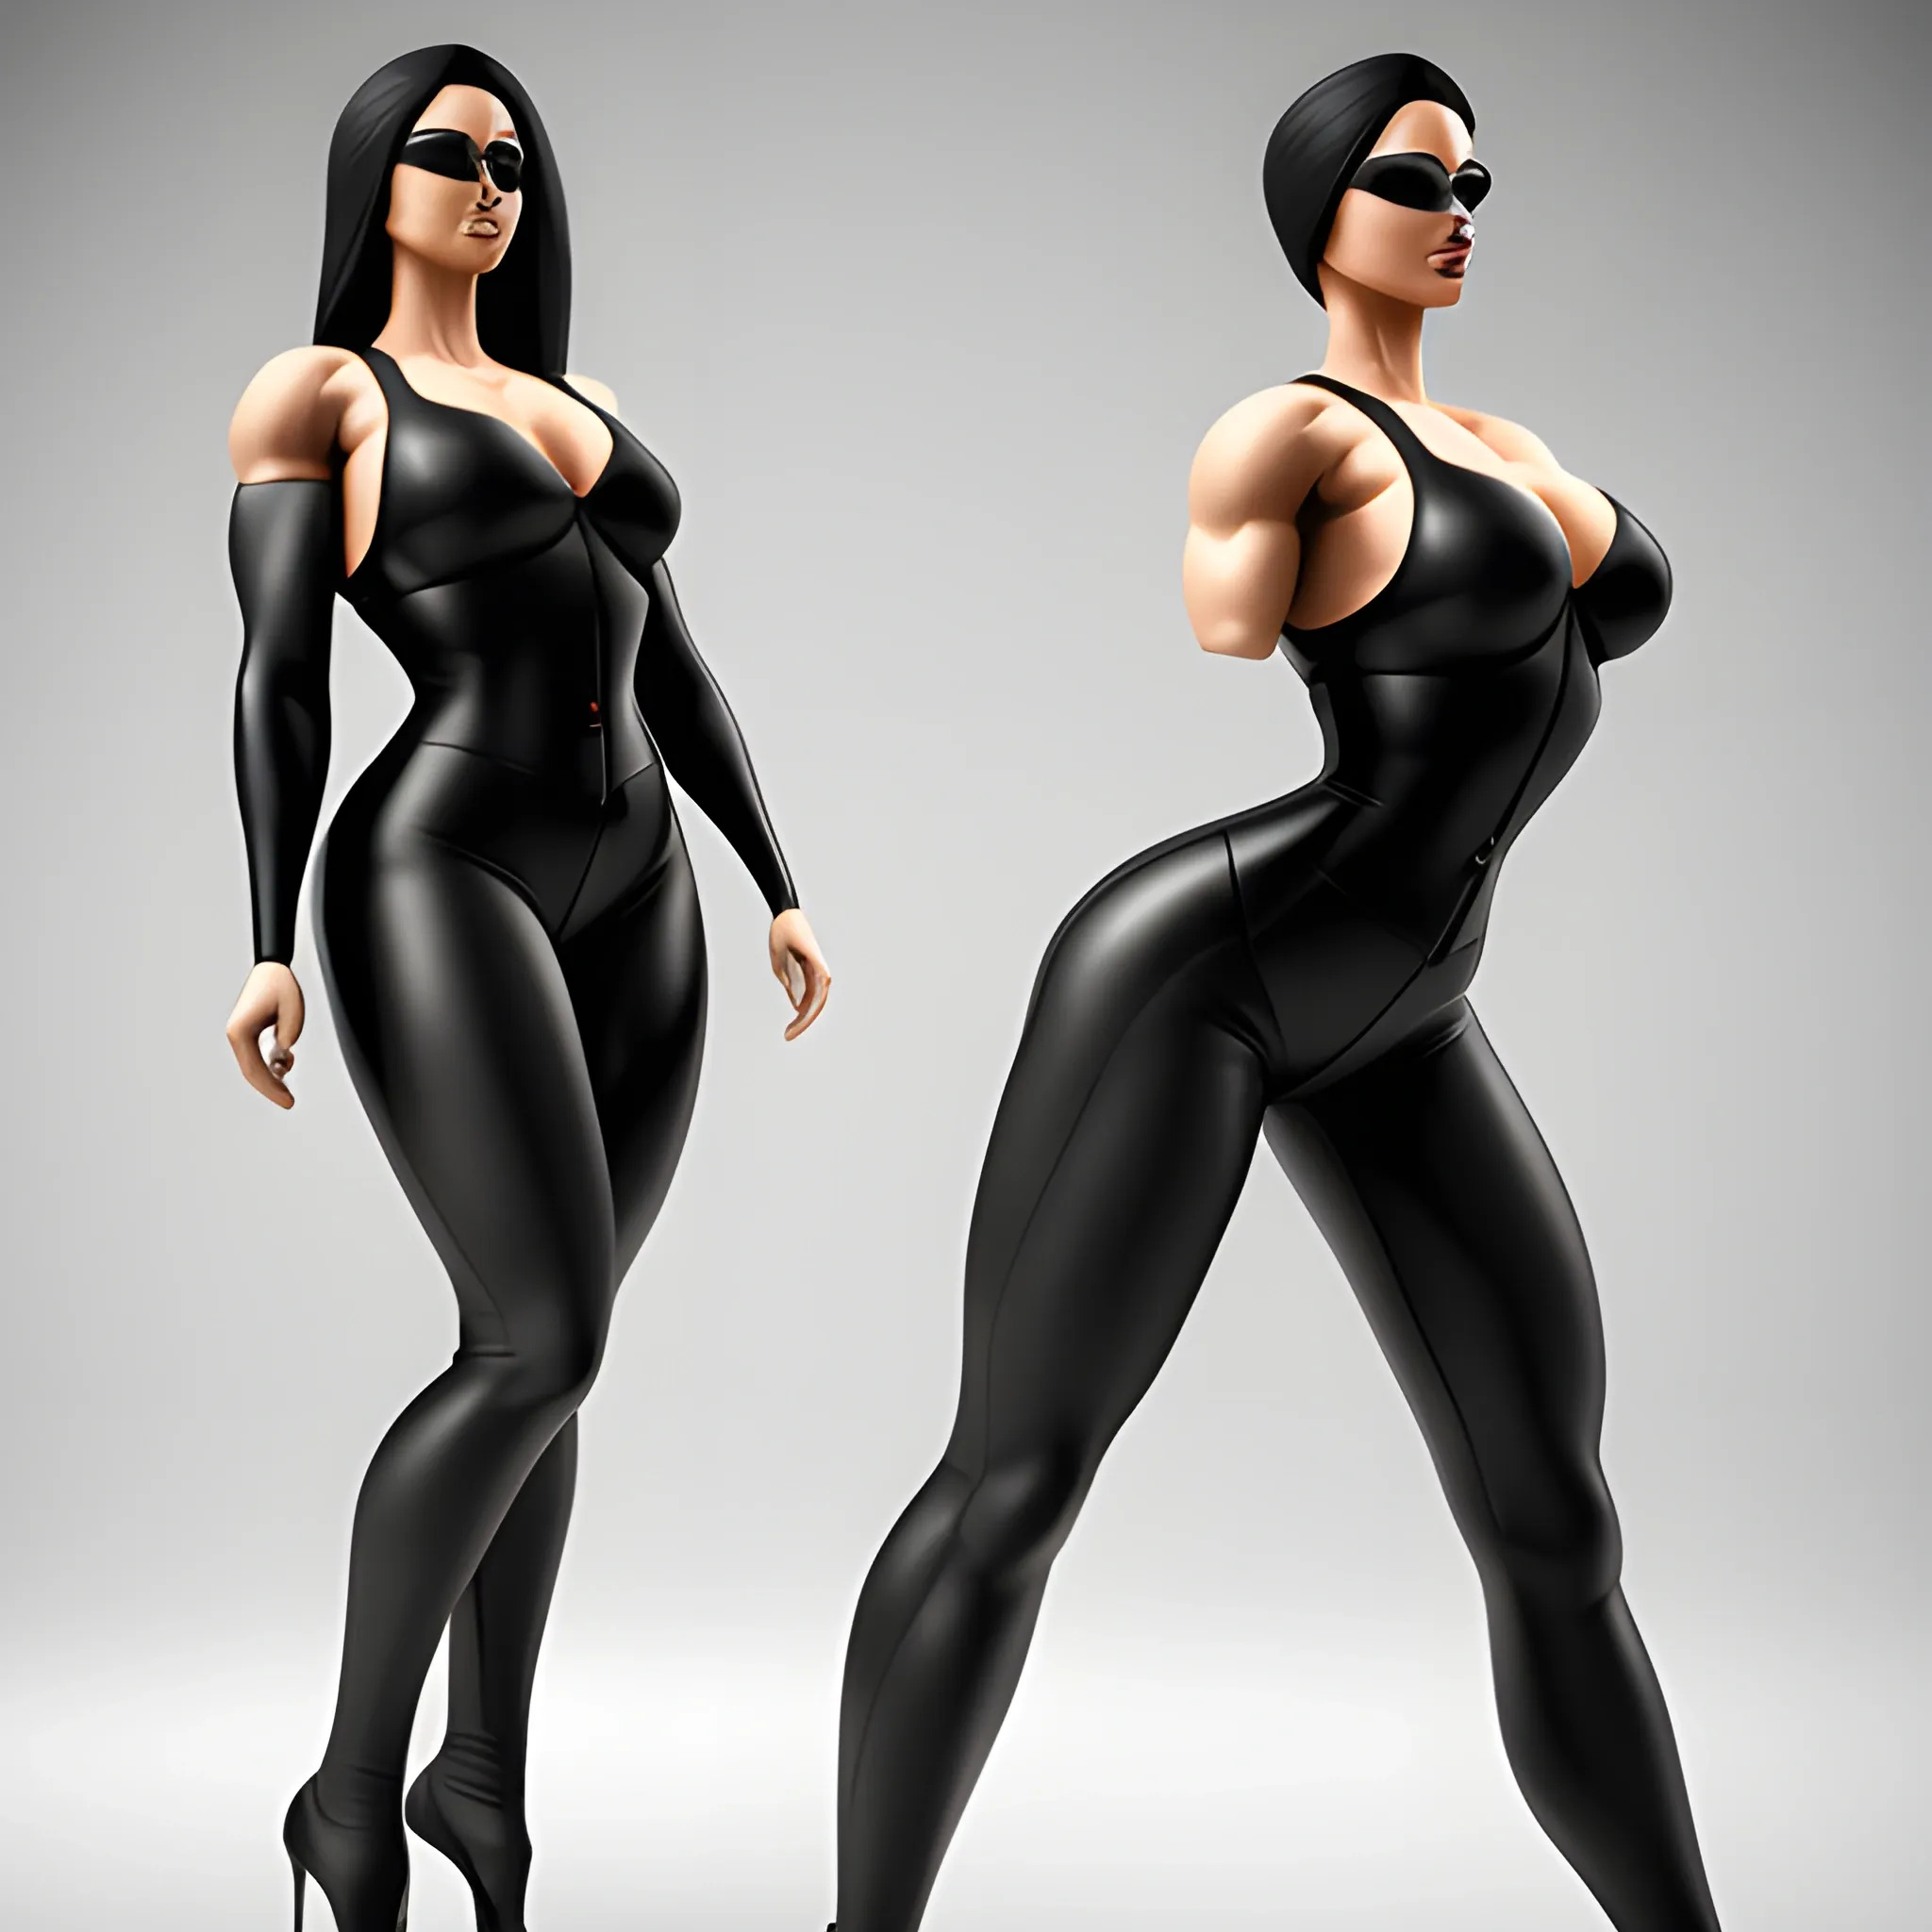 Slightly muscular, dramatic hourglass figure, five-foot five-inches tall, wearing high-heels, tight suit, 3D